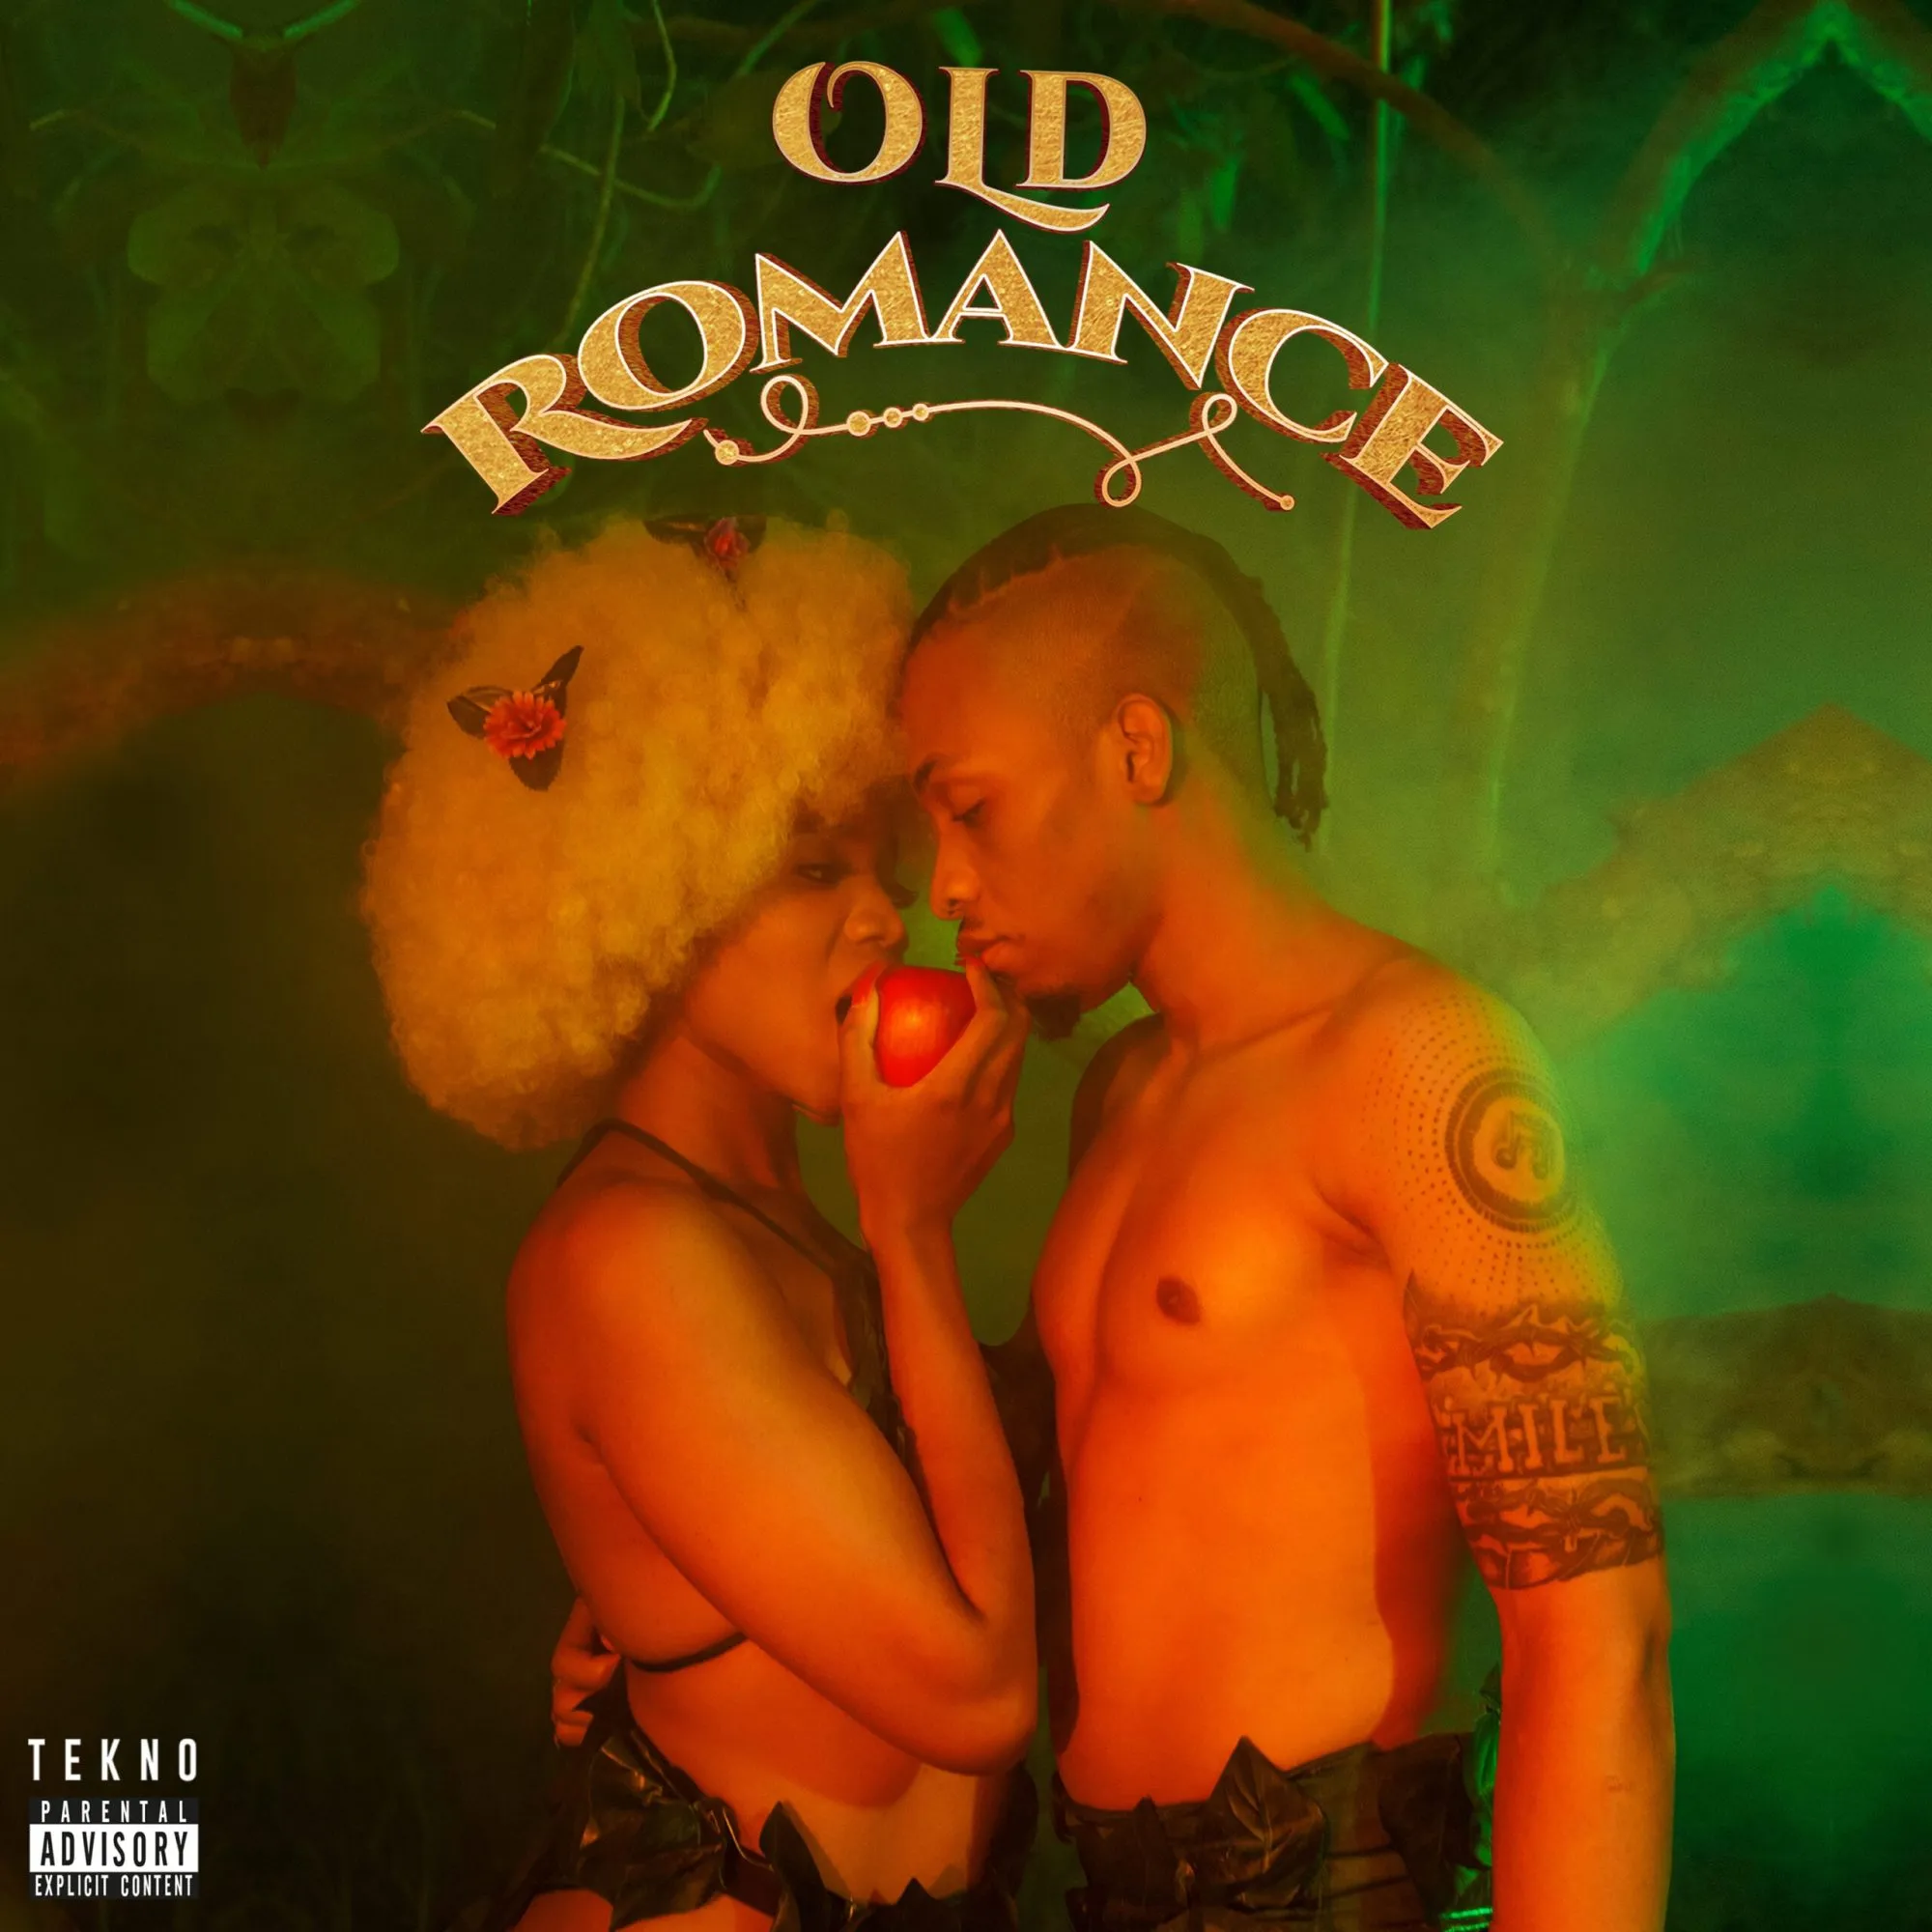 OLD ROMANCE 3000 BY 3000 DEC 1 scaled 1